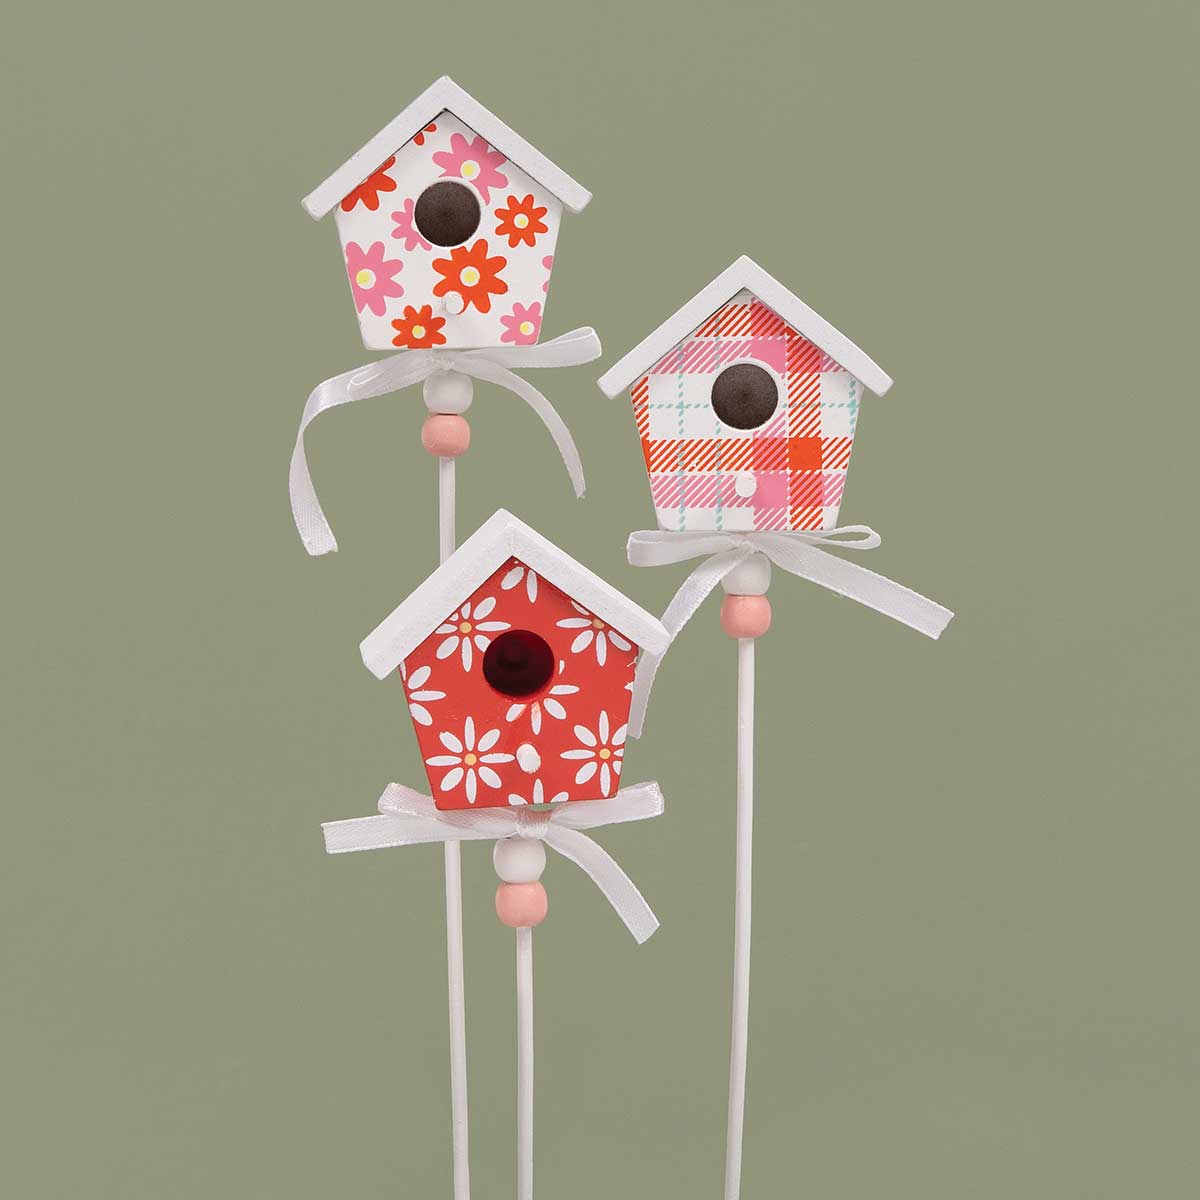 BIRDHOUSE ON STICK 3 ASSORTED 2.25IN X 1IN X 2.25IN WOOD